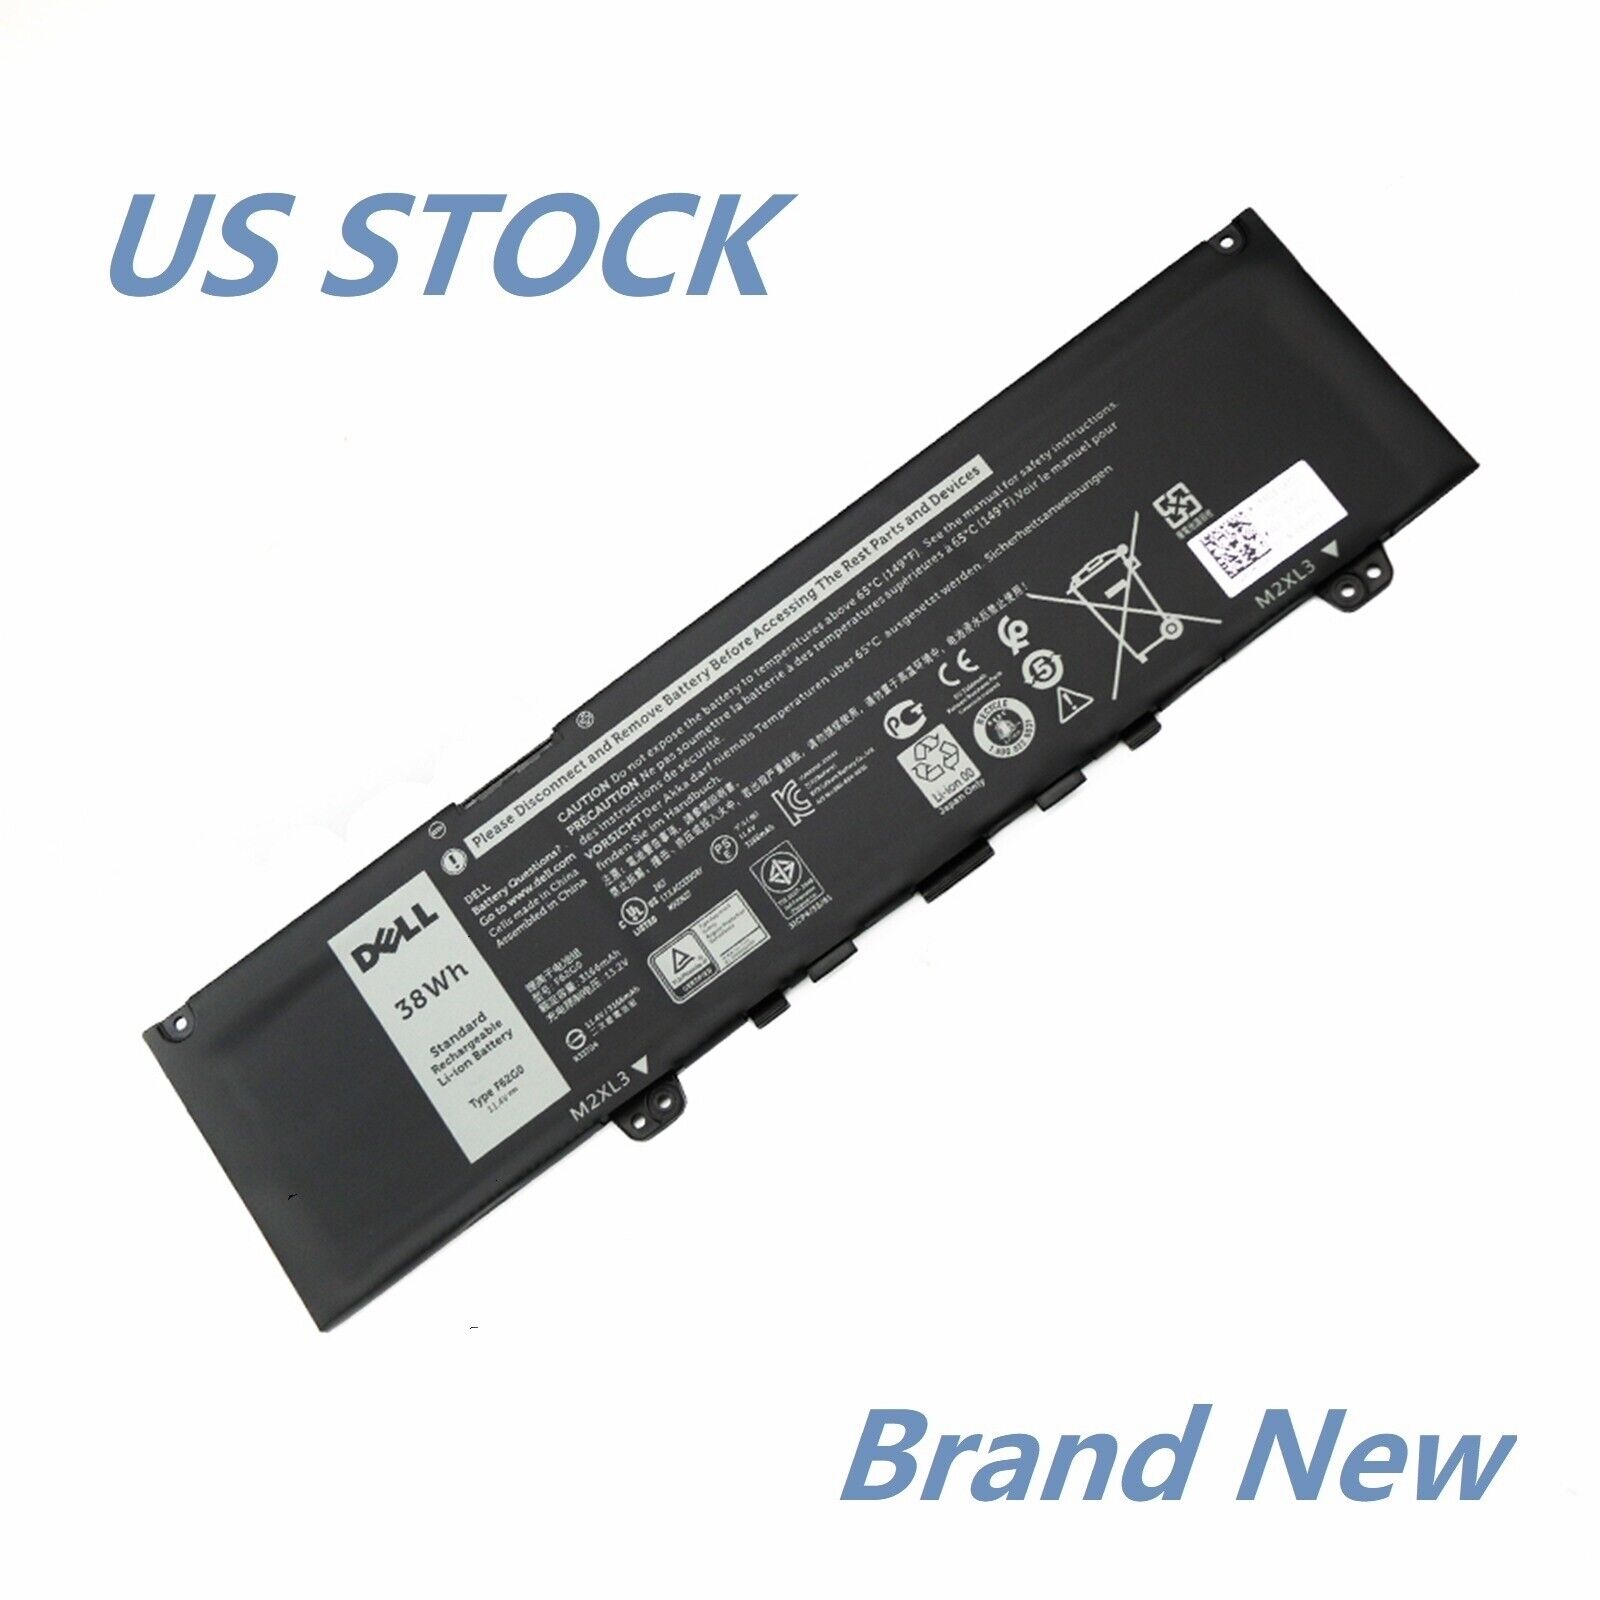 Genuine OEM F62G0 39DY5 Battery for Inspiron 13 7000 i7373 7373 7386 7380 RPJC3